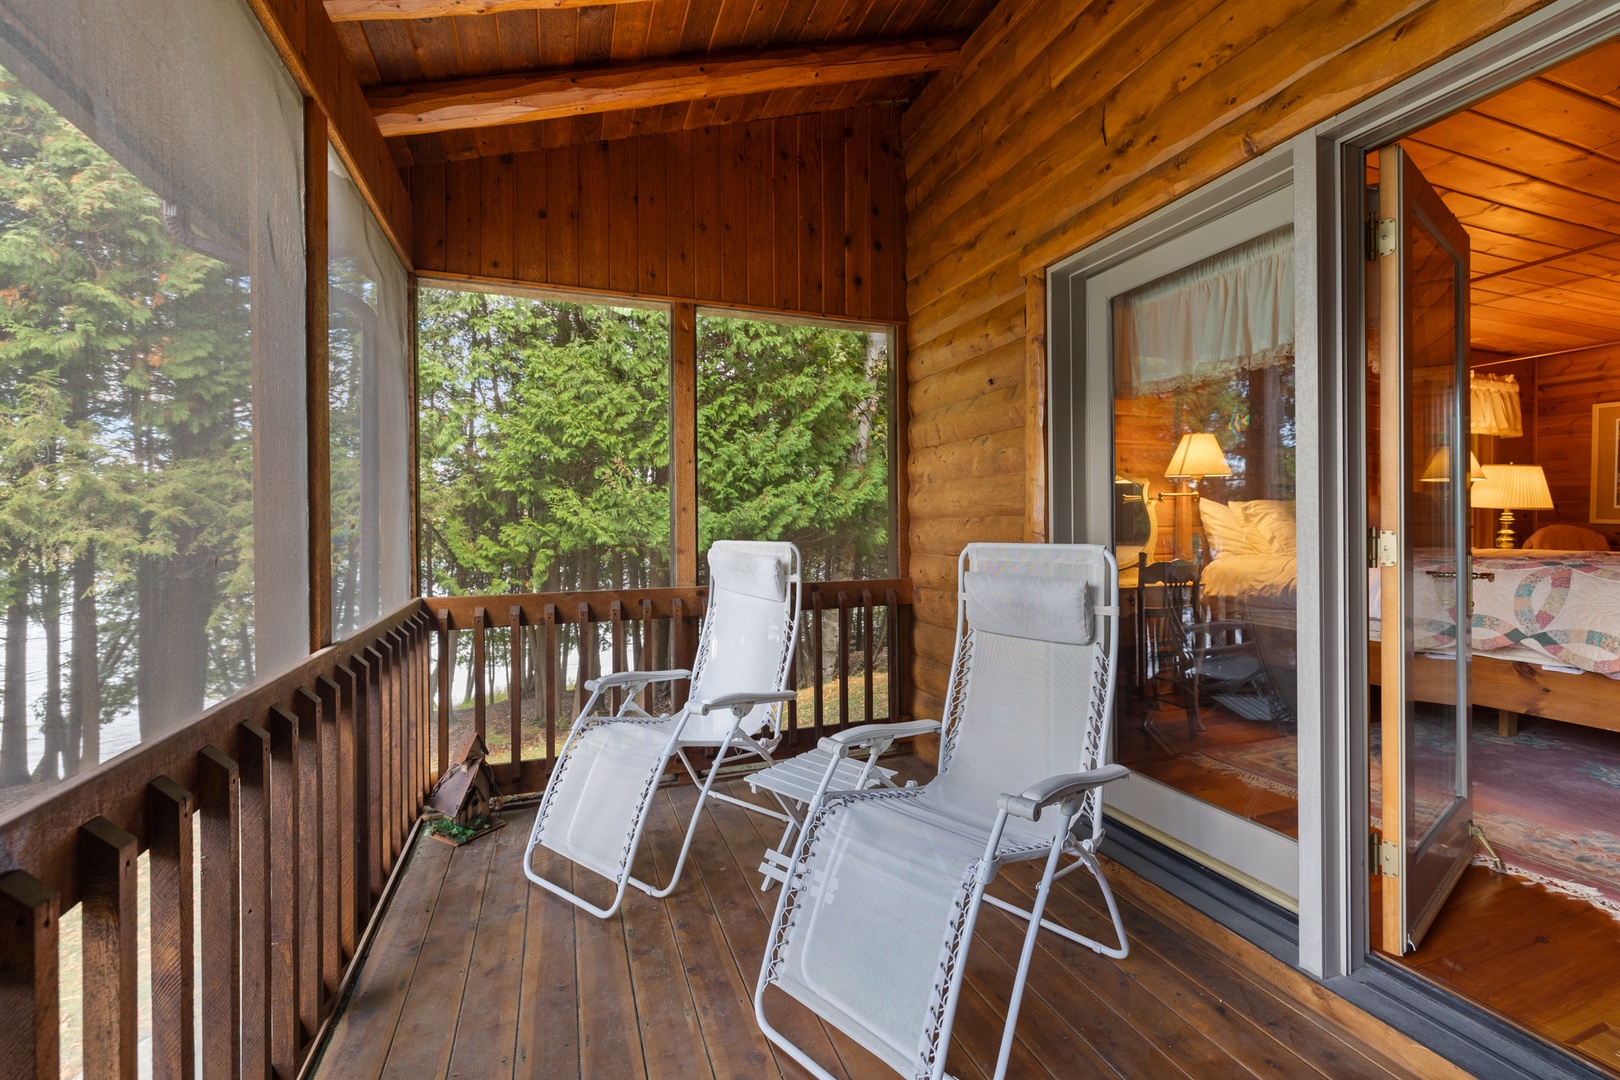 Relax on the main bedroom's porch, just the 2 of you.